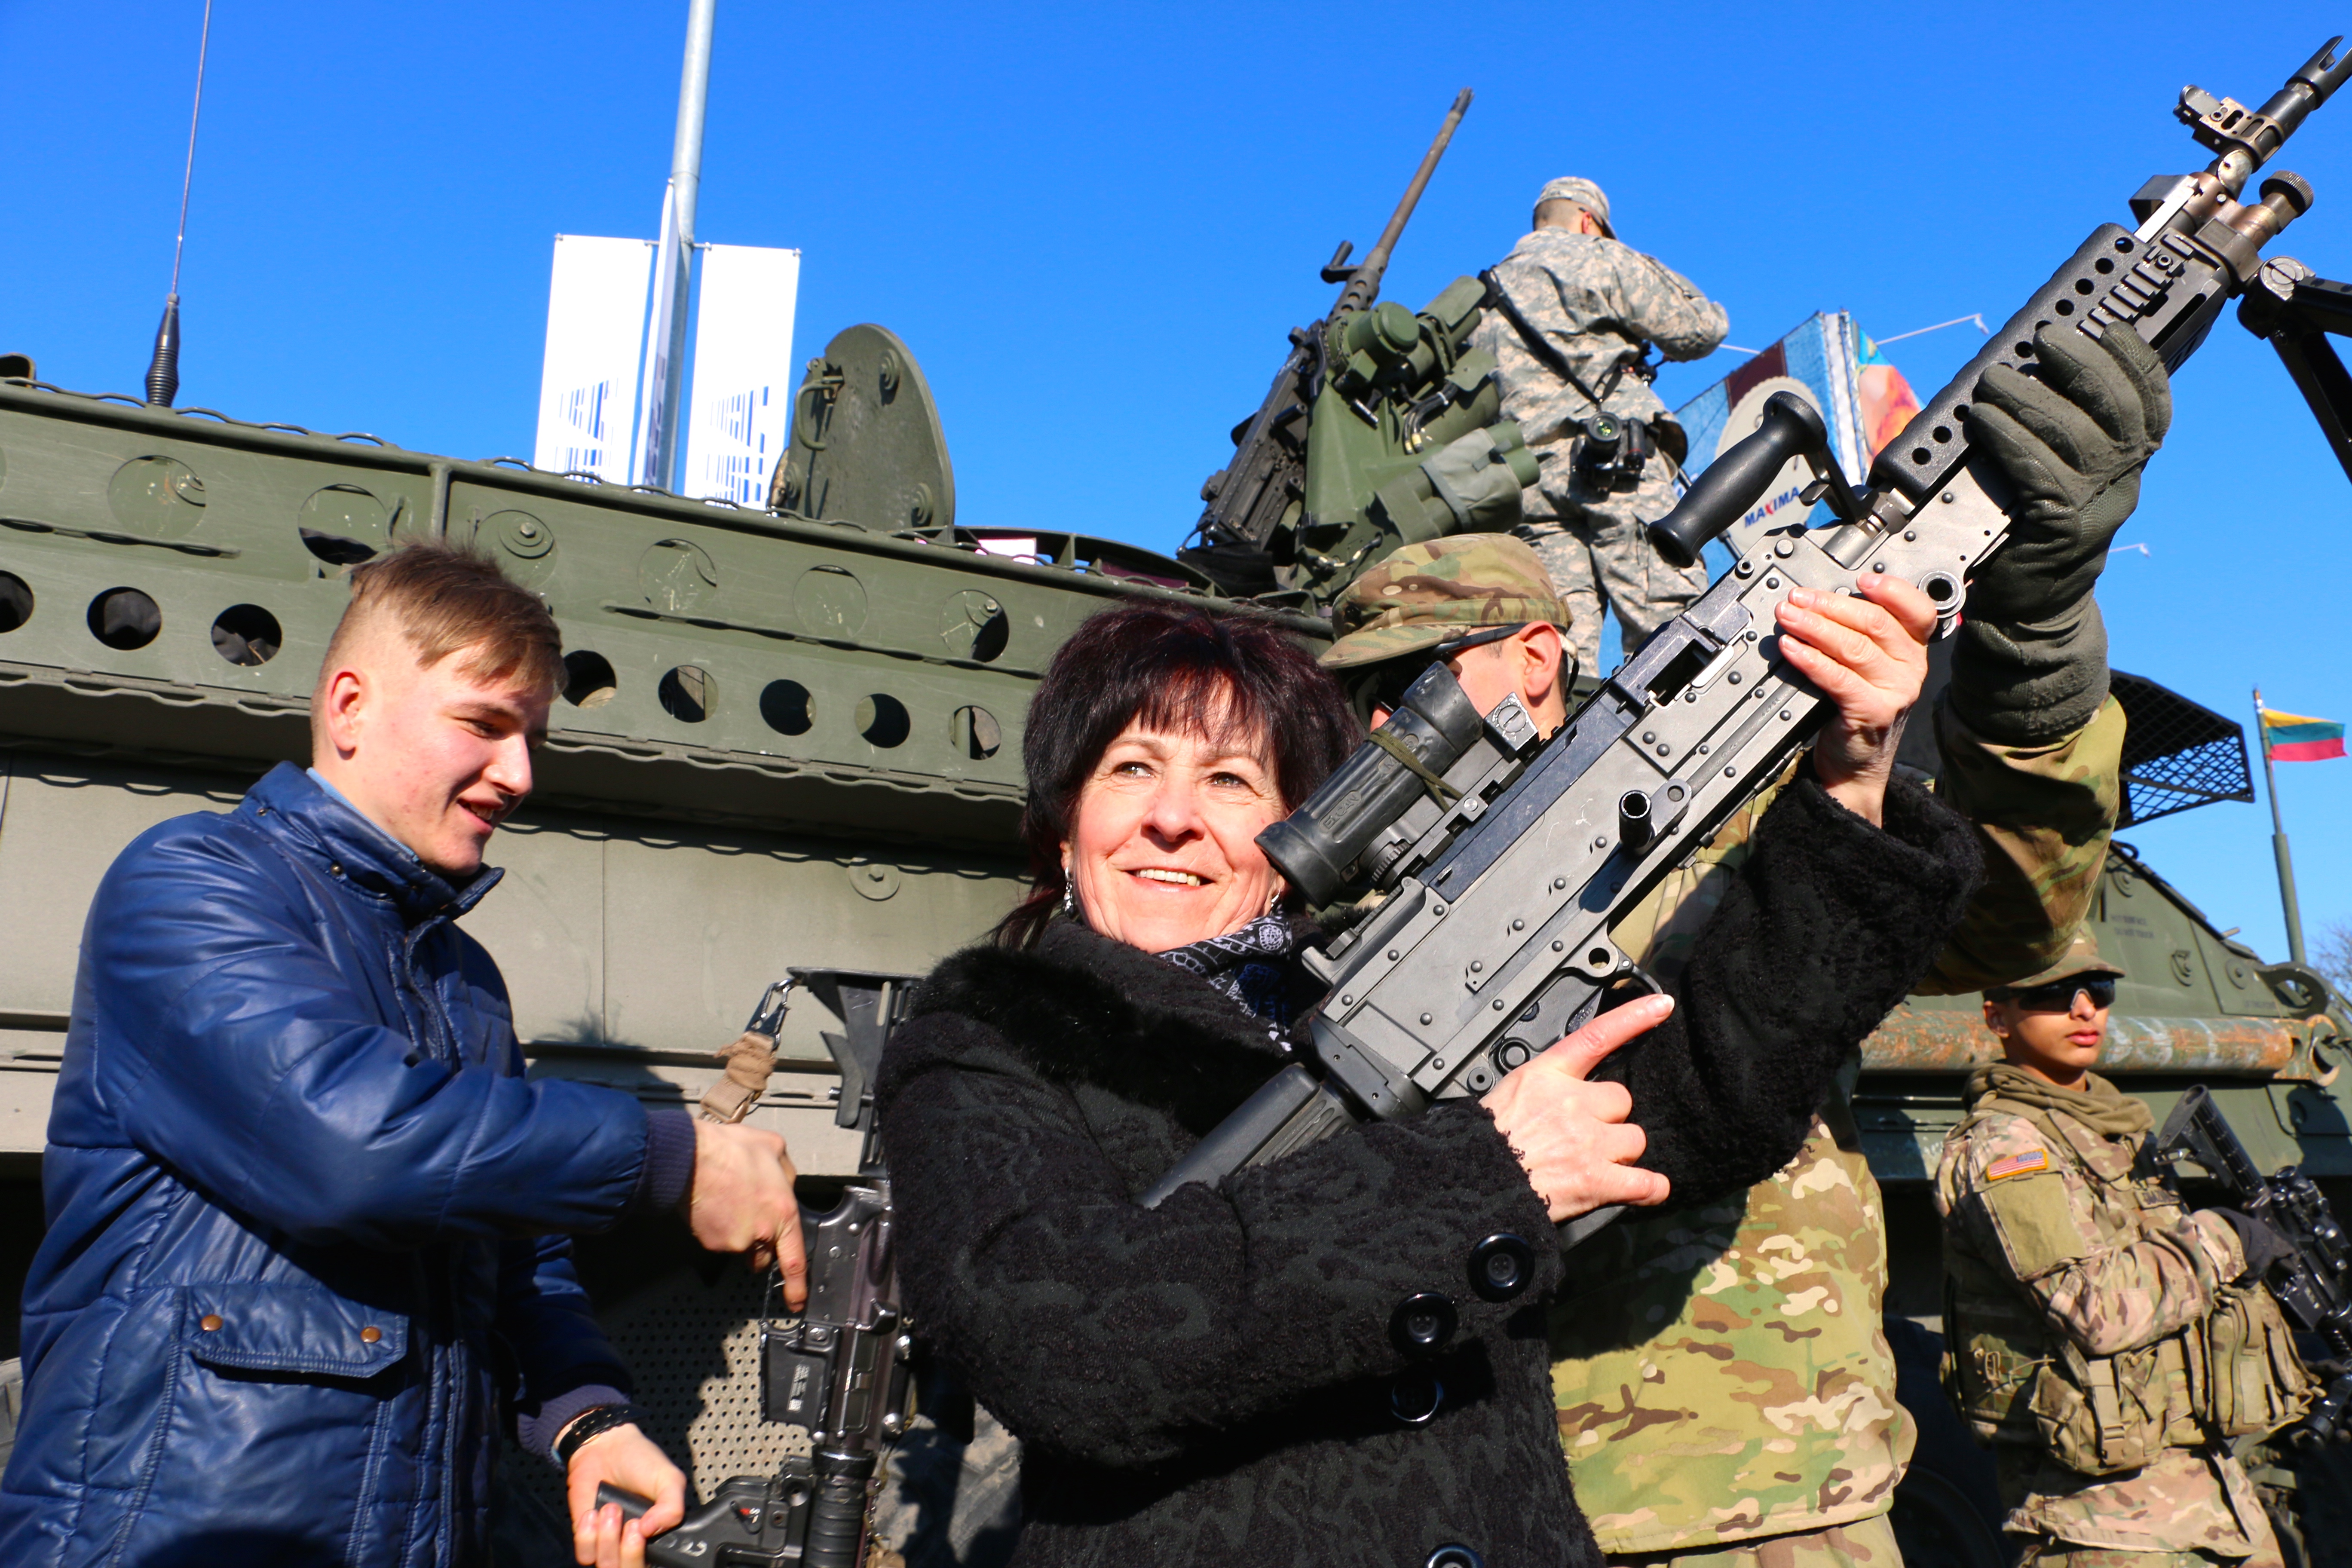 A Lithuanian woman at a U.S. Army Stryker static display in Marijampole, Lithuania on March 24. (Photo: Nolan Peterson/The Daily Signal)